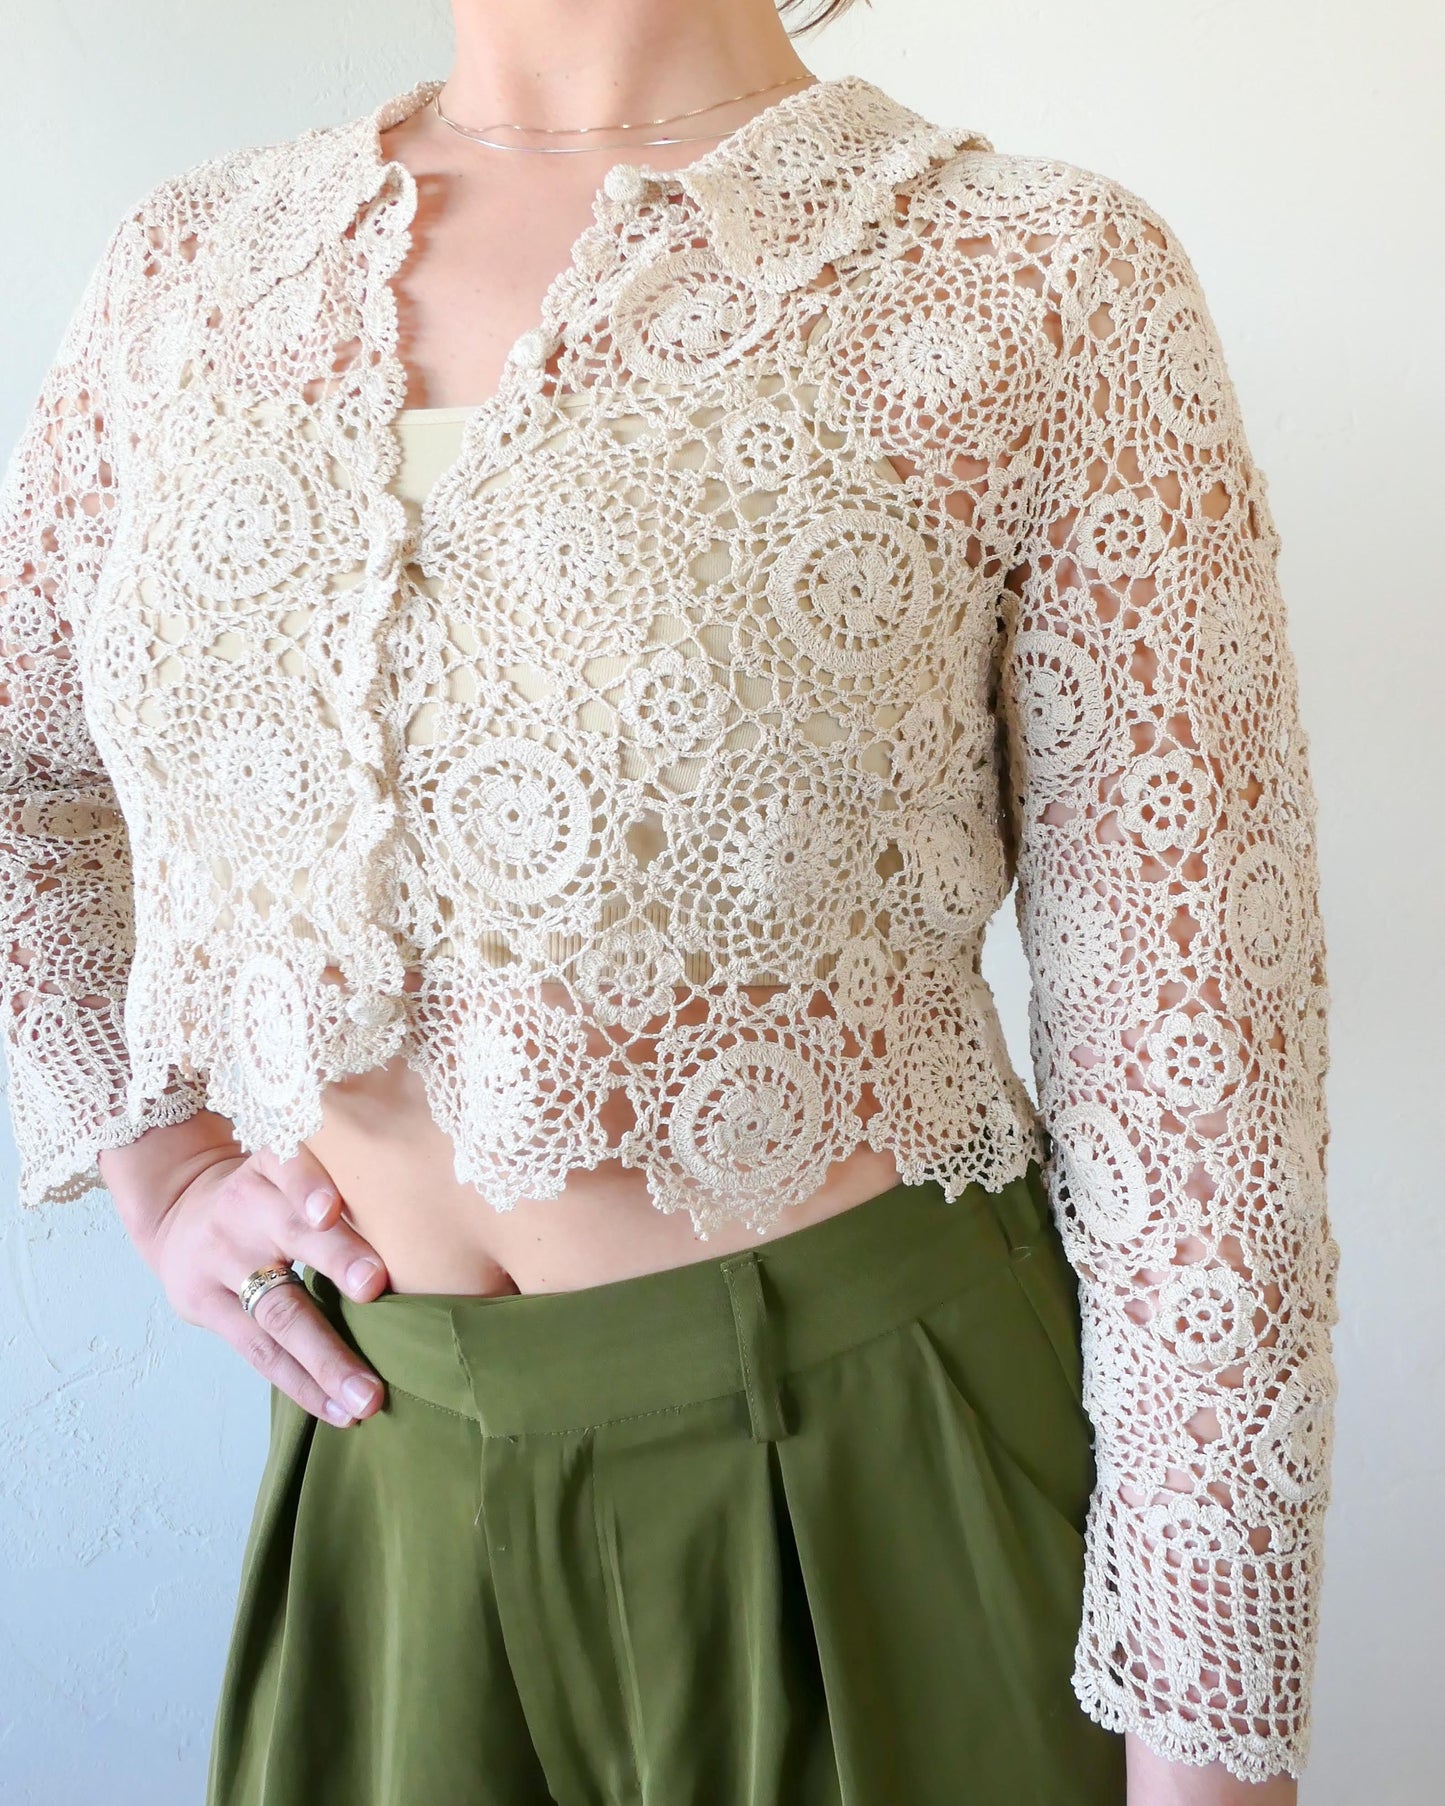 A versatile and boho chic hand crocheted cropped cardigan sweater with a unique, repeating kaleidoscope-like floral pattern throughout. Dress it down with a pair of jeans and sandals, or dress it up with neutral colored wide leg pants, heels, and a pair of vintage dangly earrings.